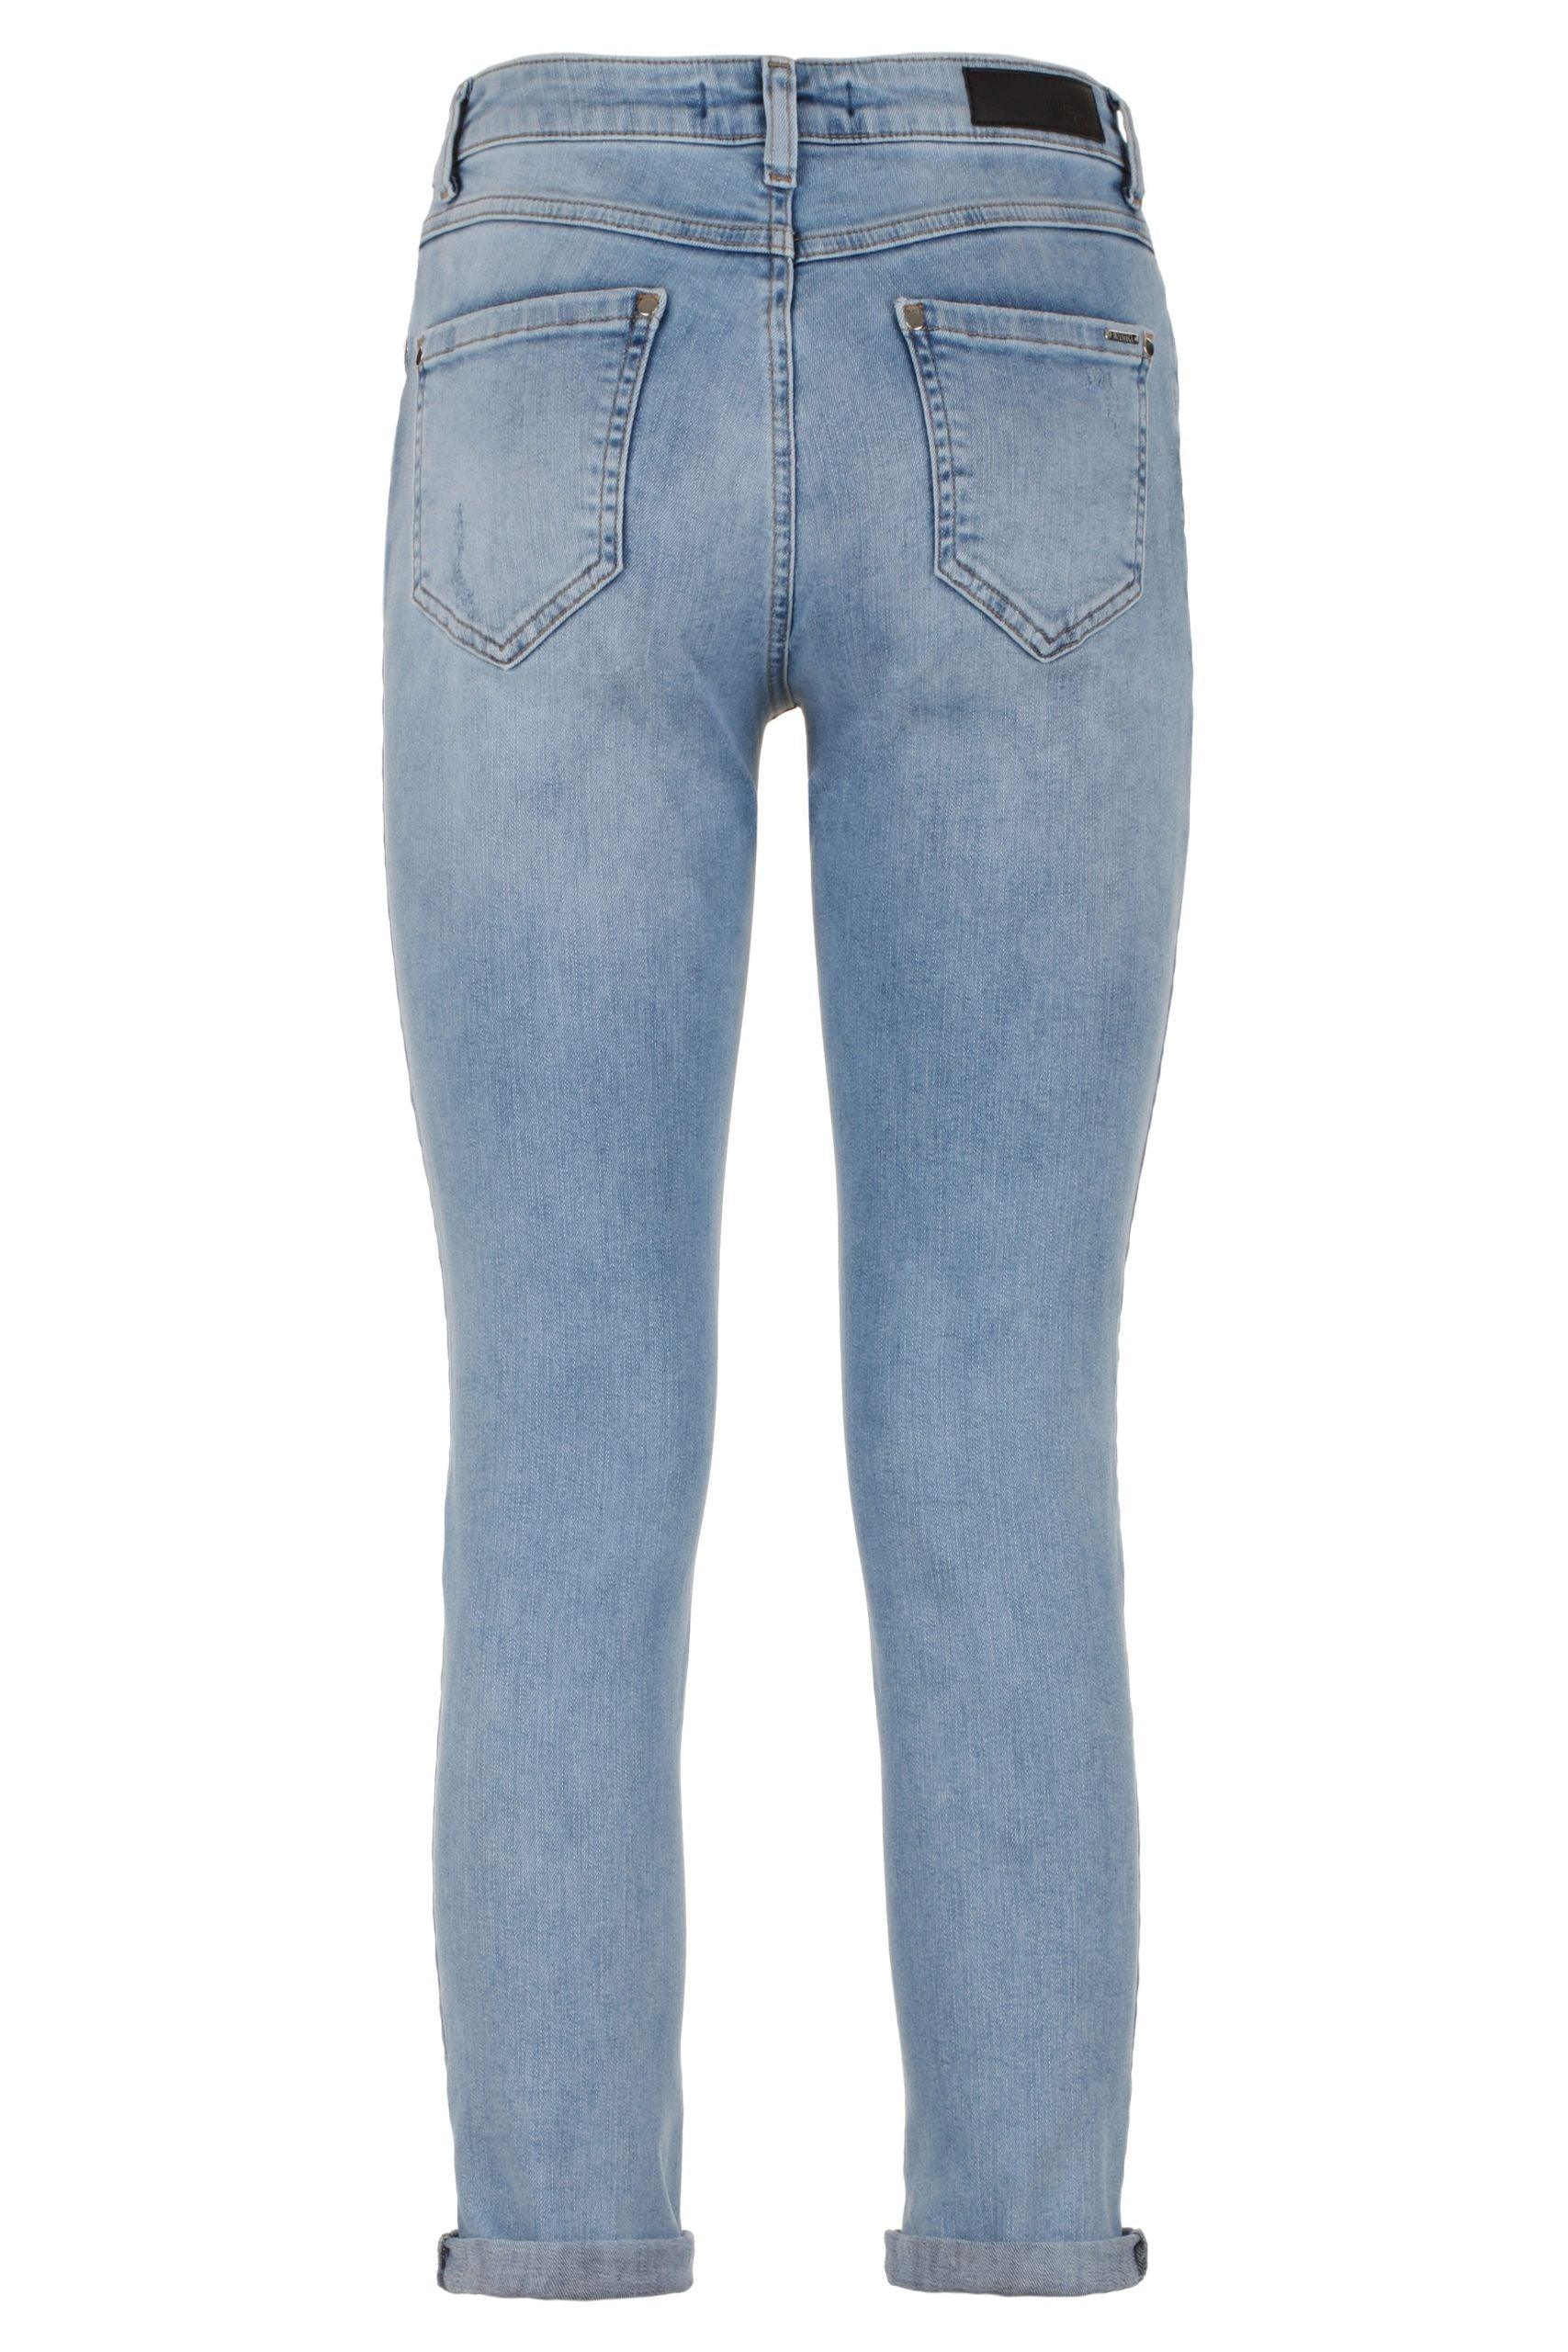 Imperfect Women's Blue Cotton Denim Jeans - Designed by Imperfect Available to Buy at a Discounted Price on Moon Behind The Hill Online Designer Discount Store